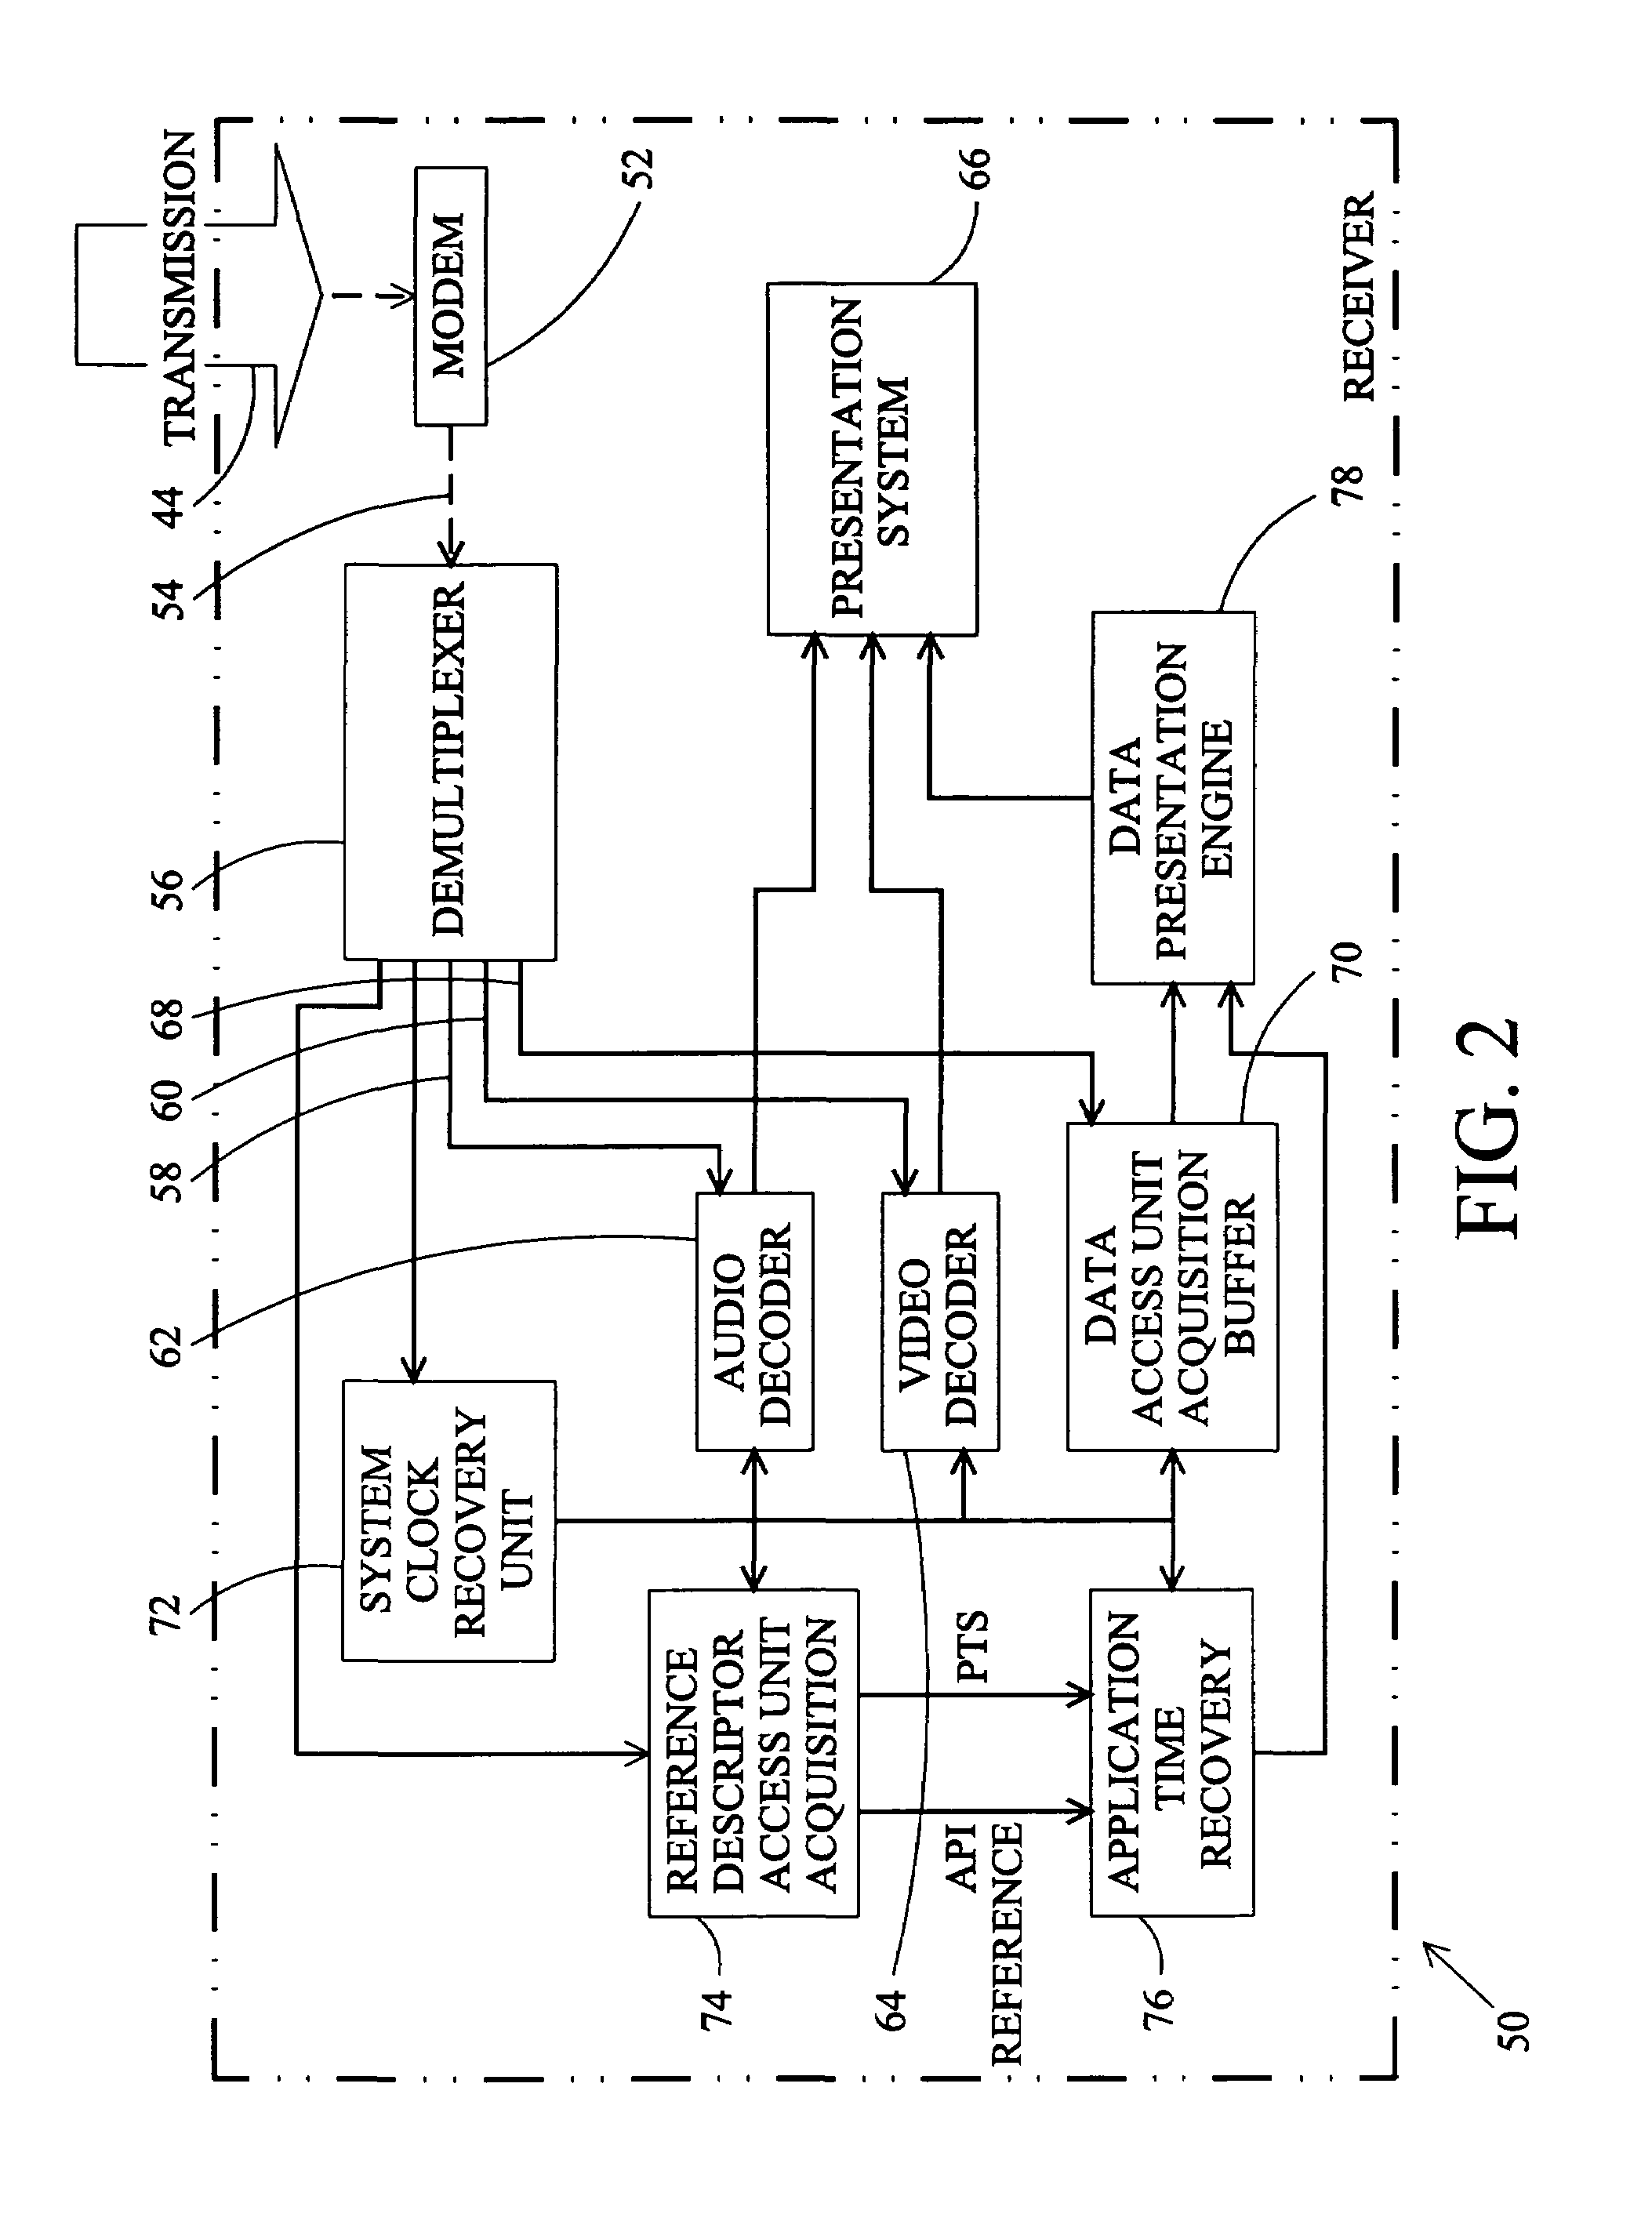 Method of synchronizing events with a digital television audio-visual program